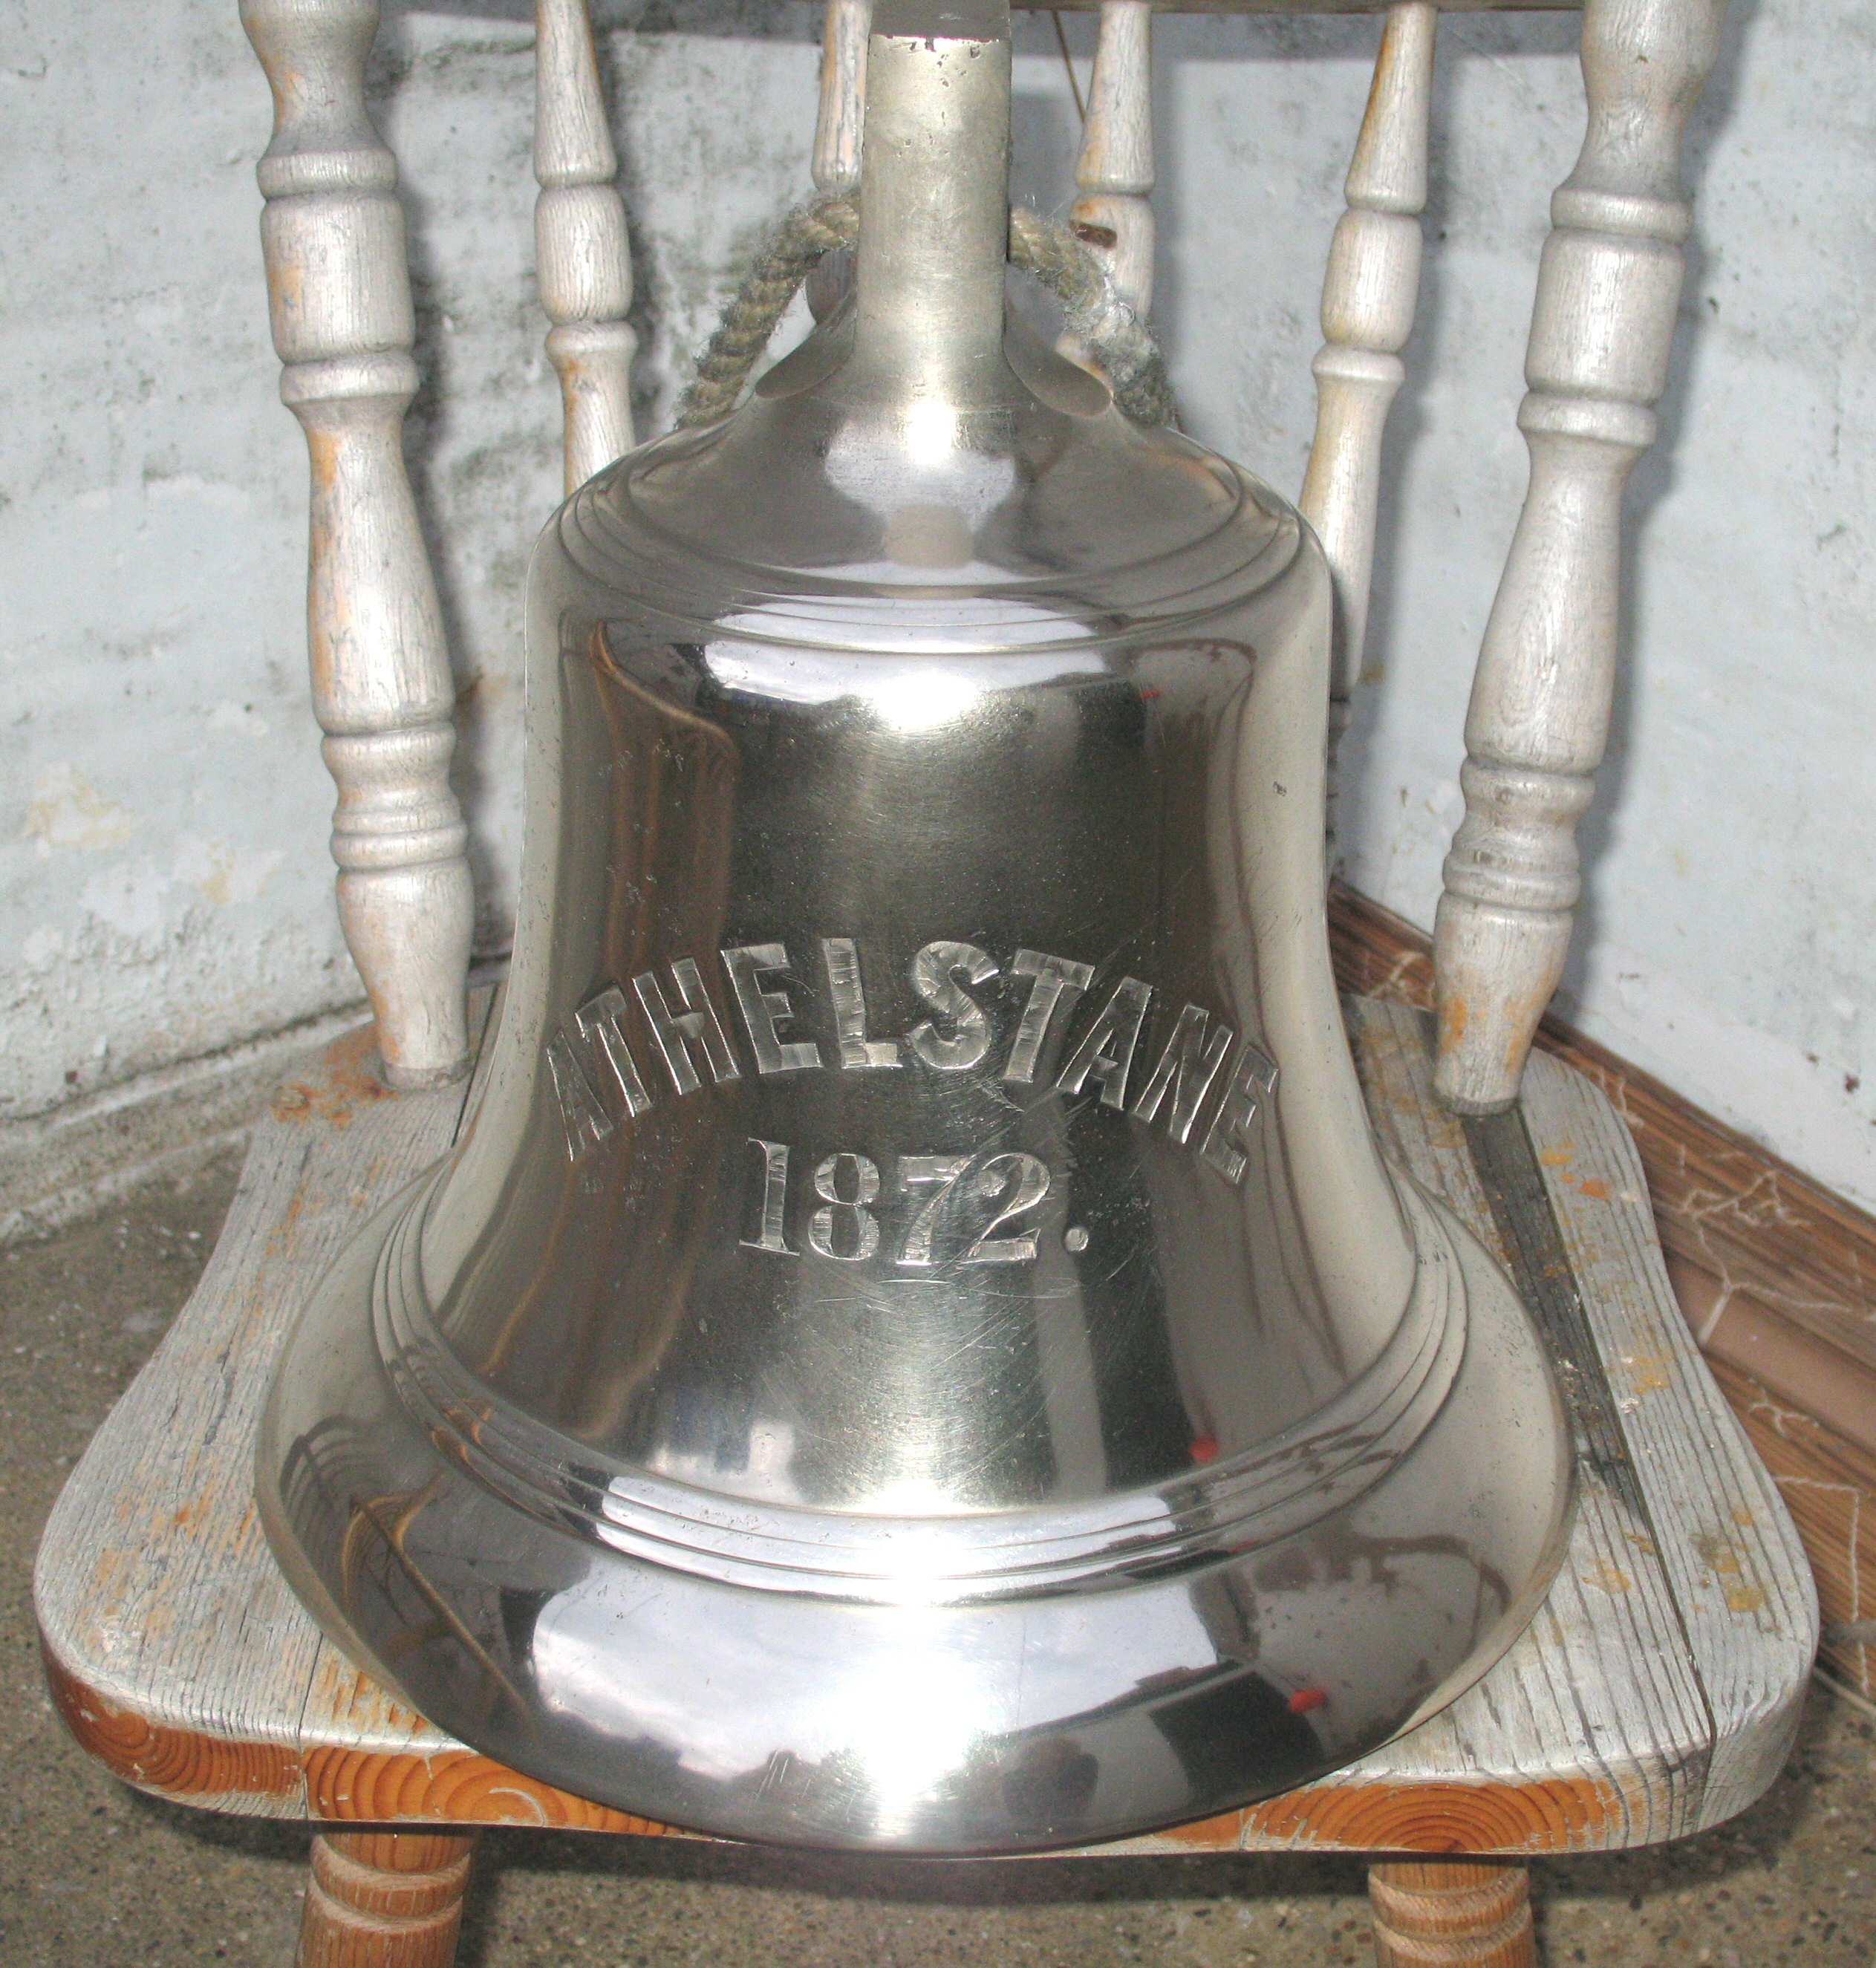 The bell from the Athelstane